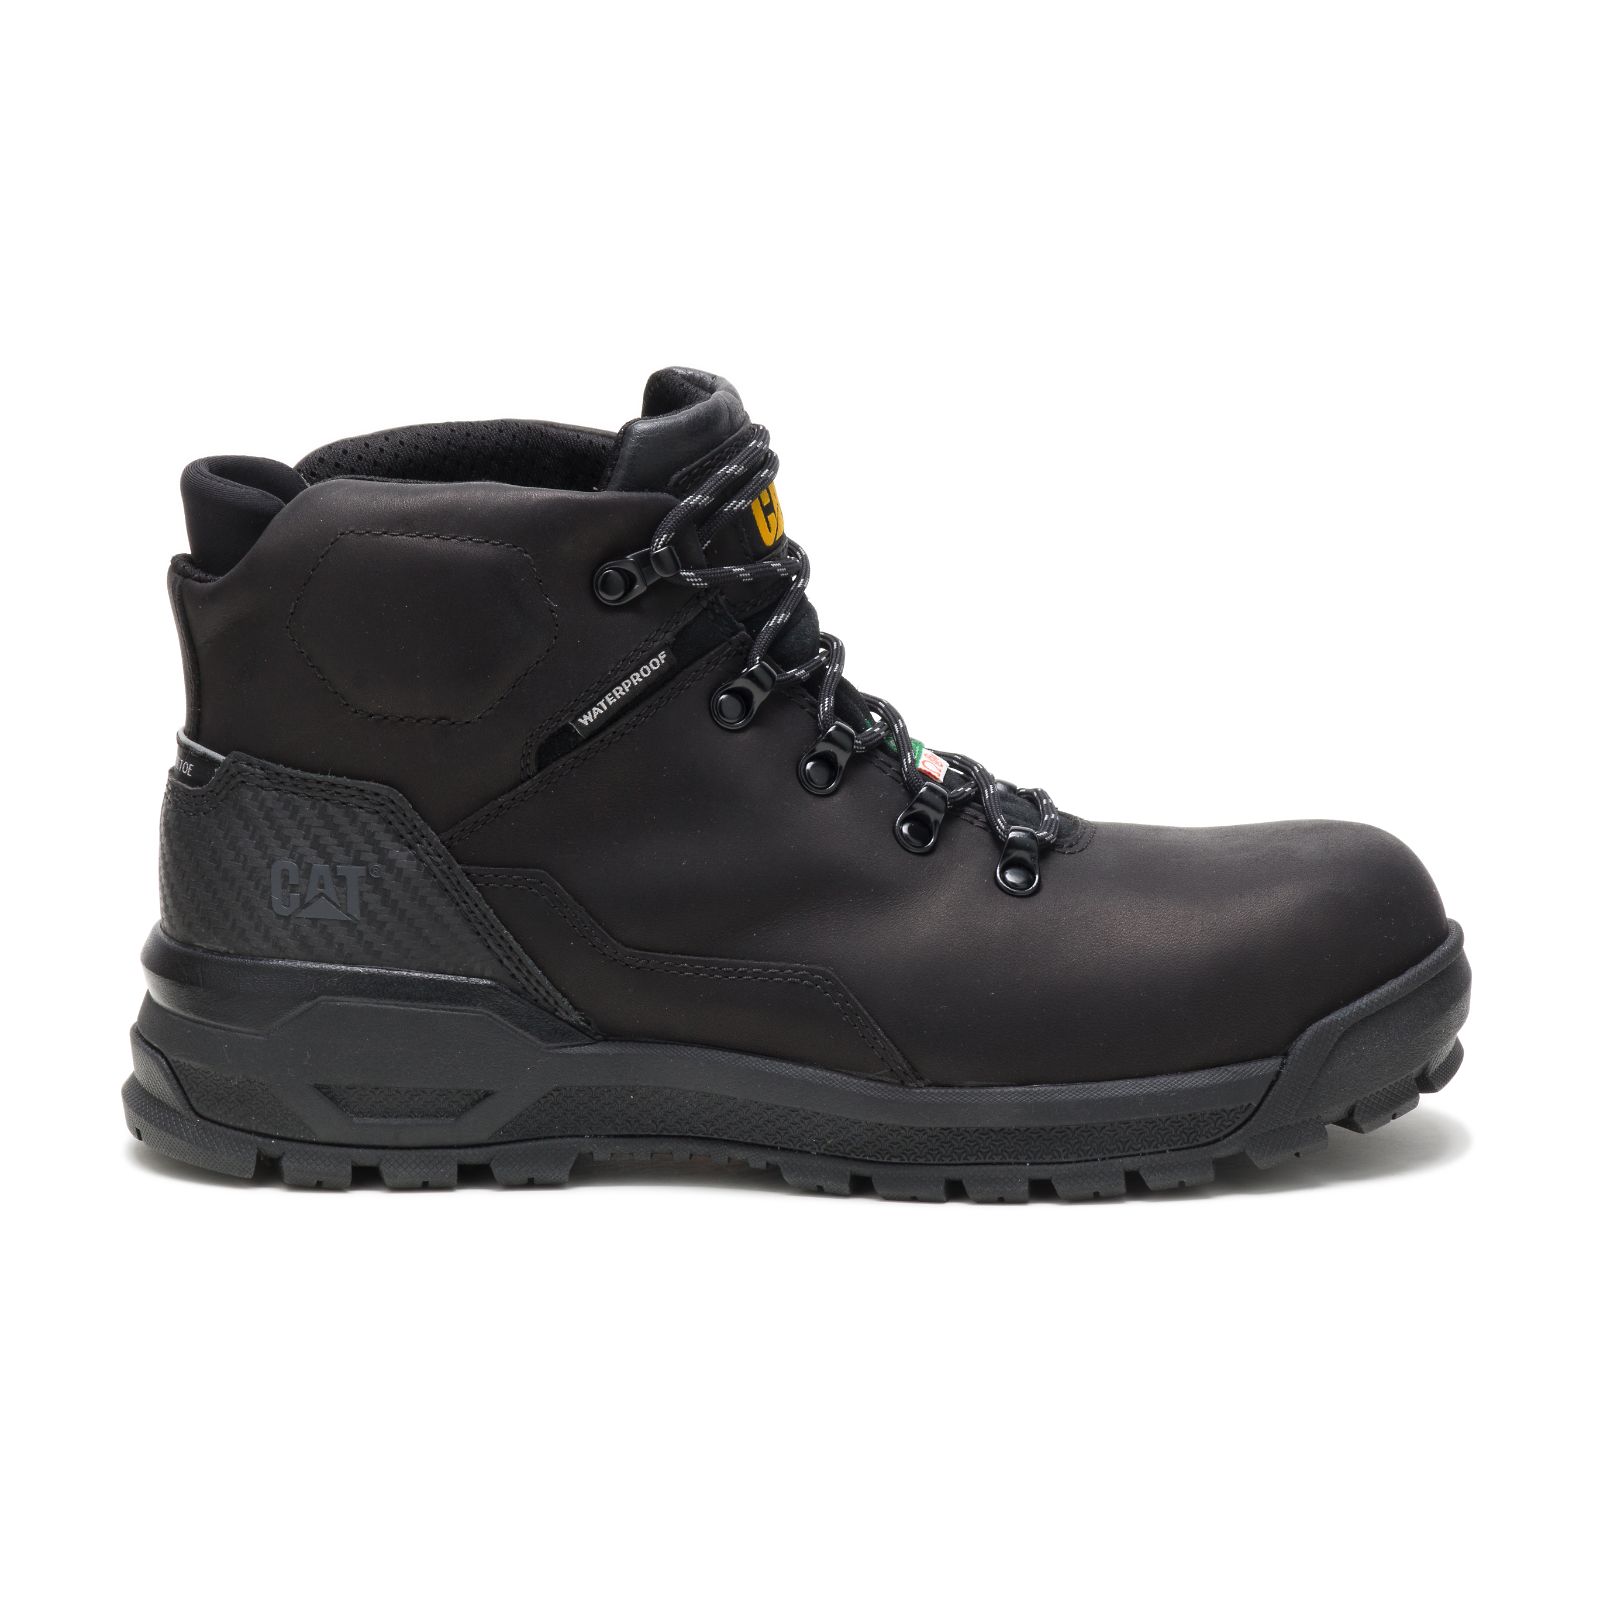 Caterpillar Boots Sale - Caterpillar Kinetic Ice+ Waterproof Thinsulate™ Composite Toe Csa Mens Work Boots Black (074361-PHM)